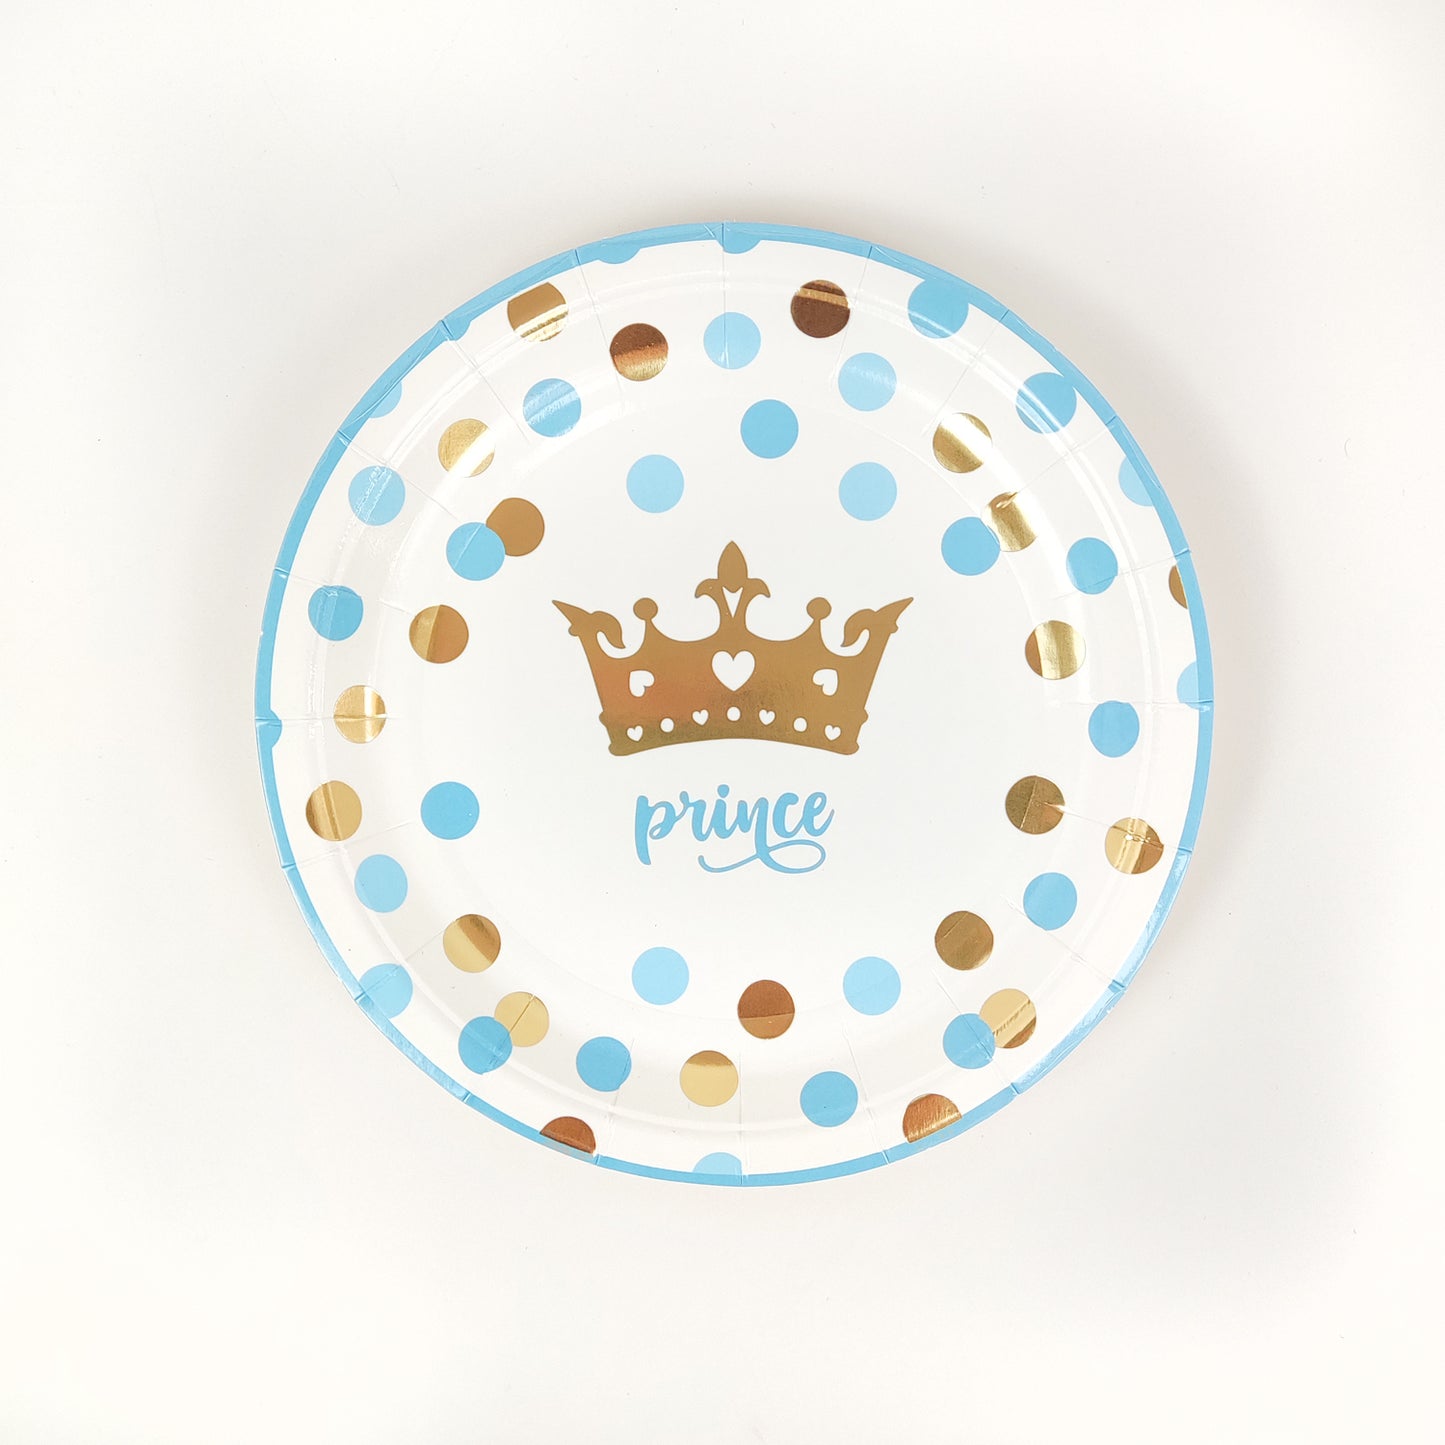 Prince Design Paper Tableware Set Disposable Party Plate Cup Napkin for Baby Shower Boy's Birthday